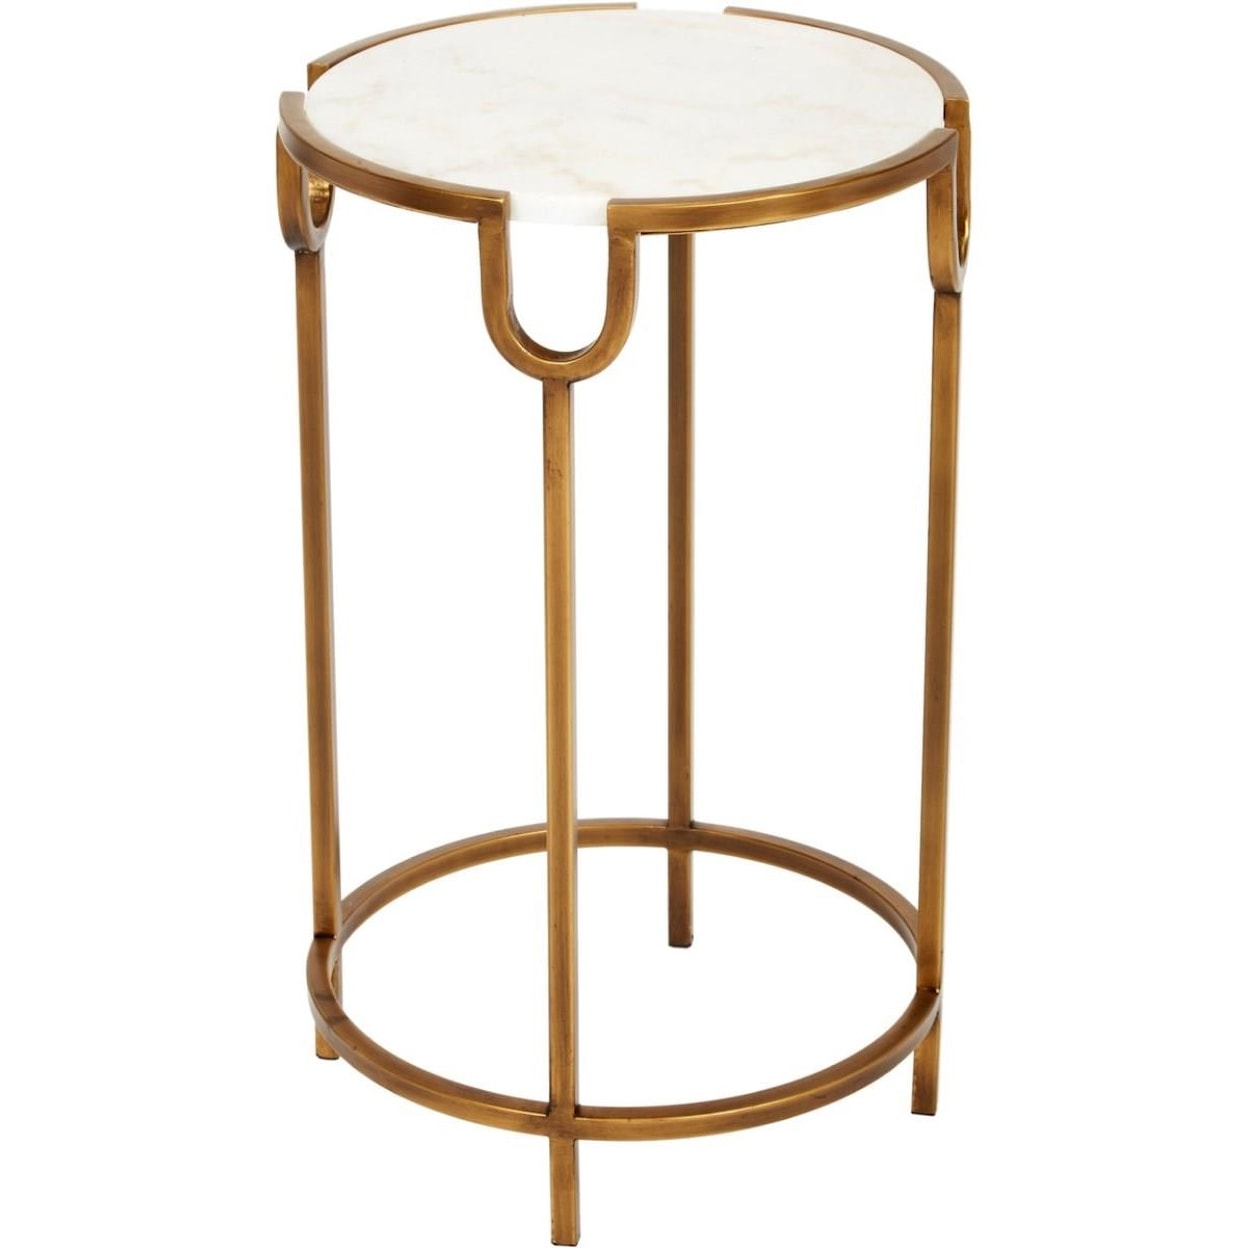 Old World Design Beth Beth Gold Accent Table